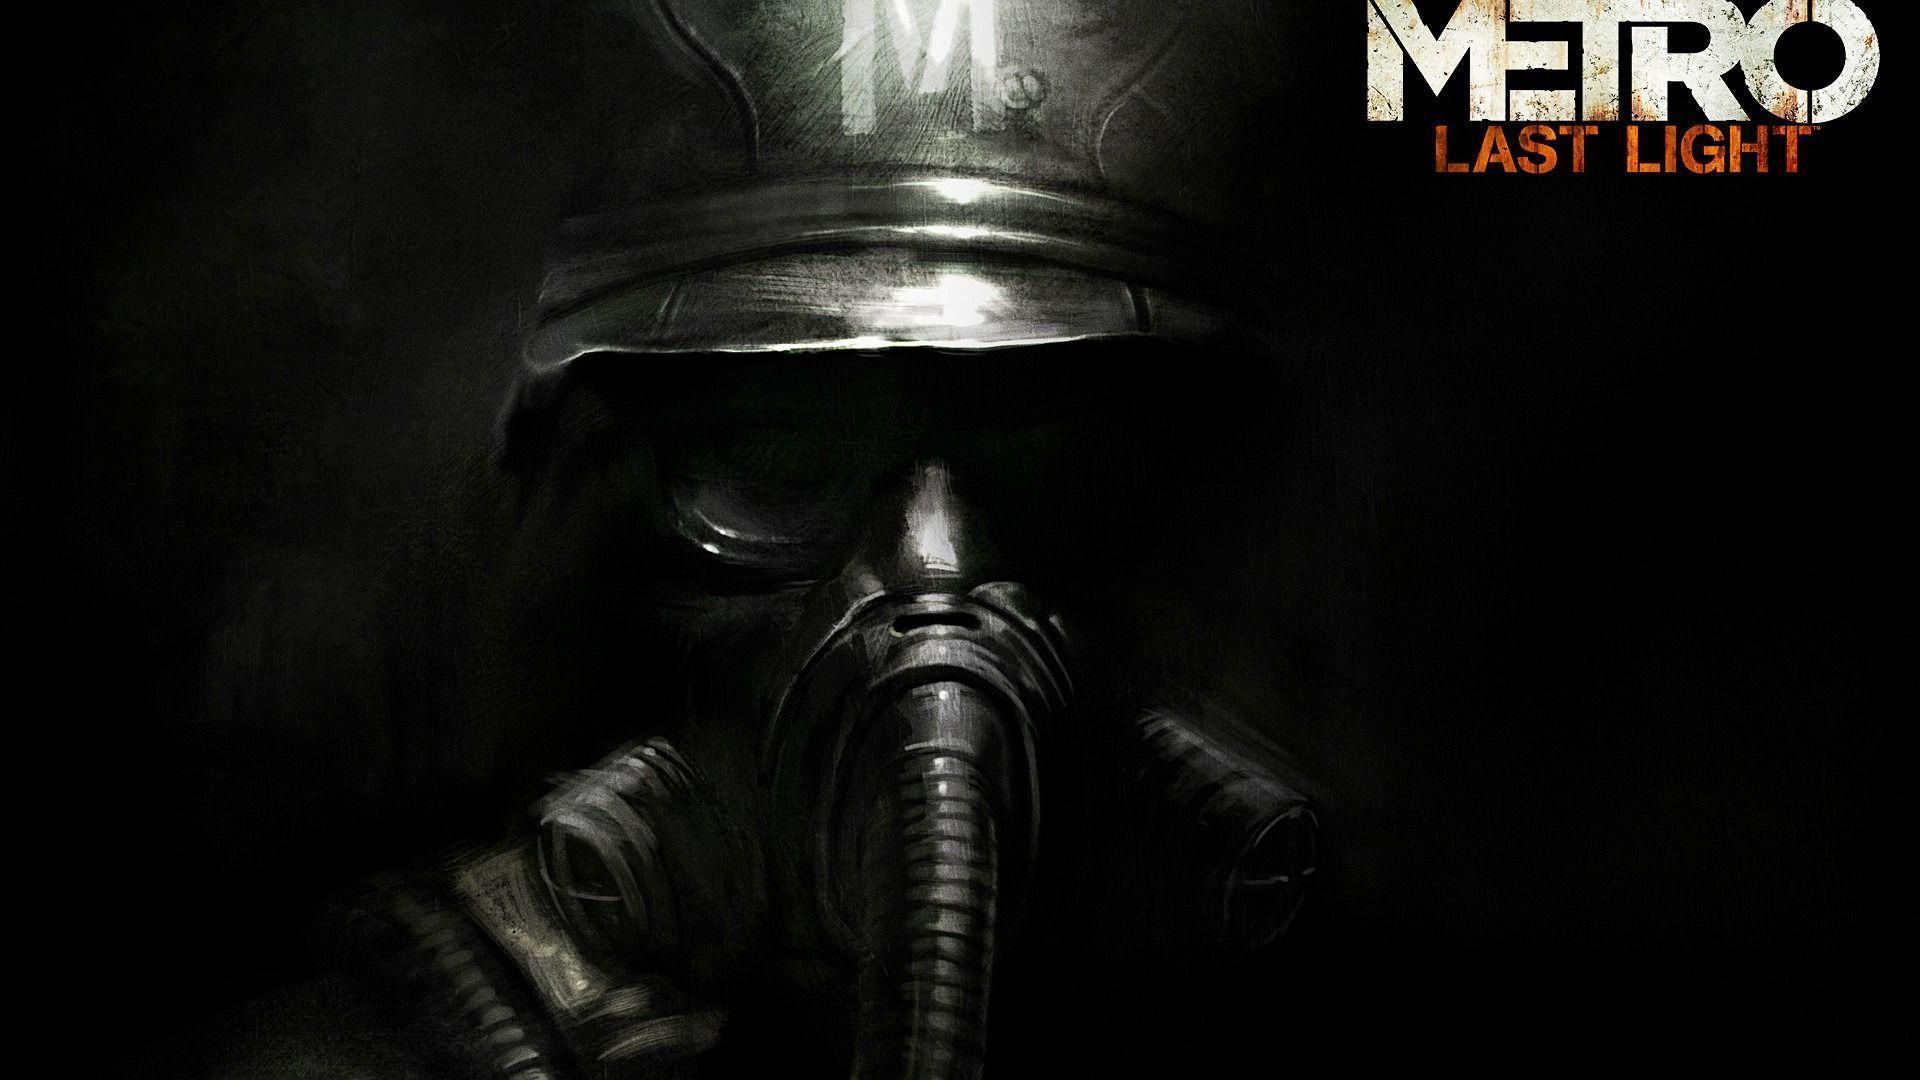 Wallpapers wallpapers from Metro: Last Light